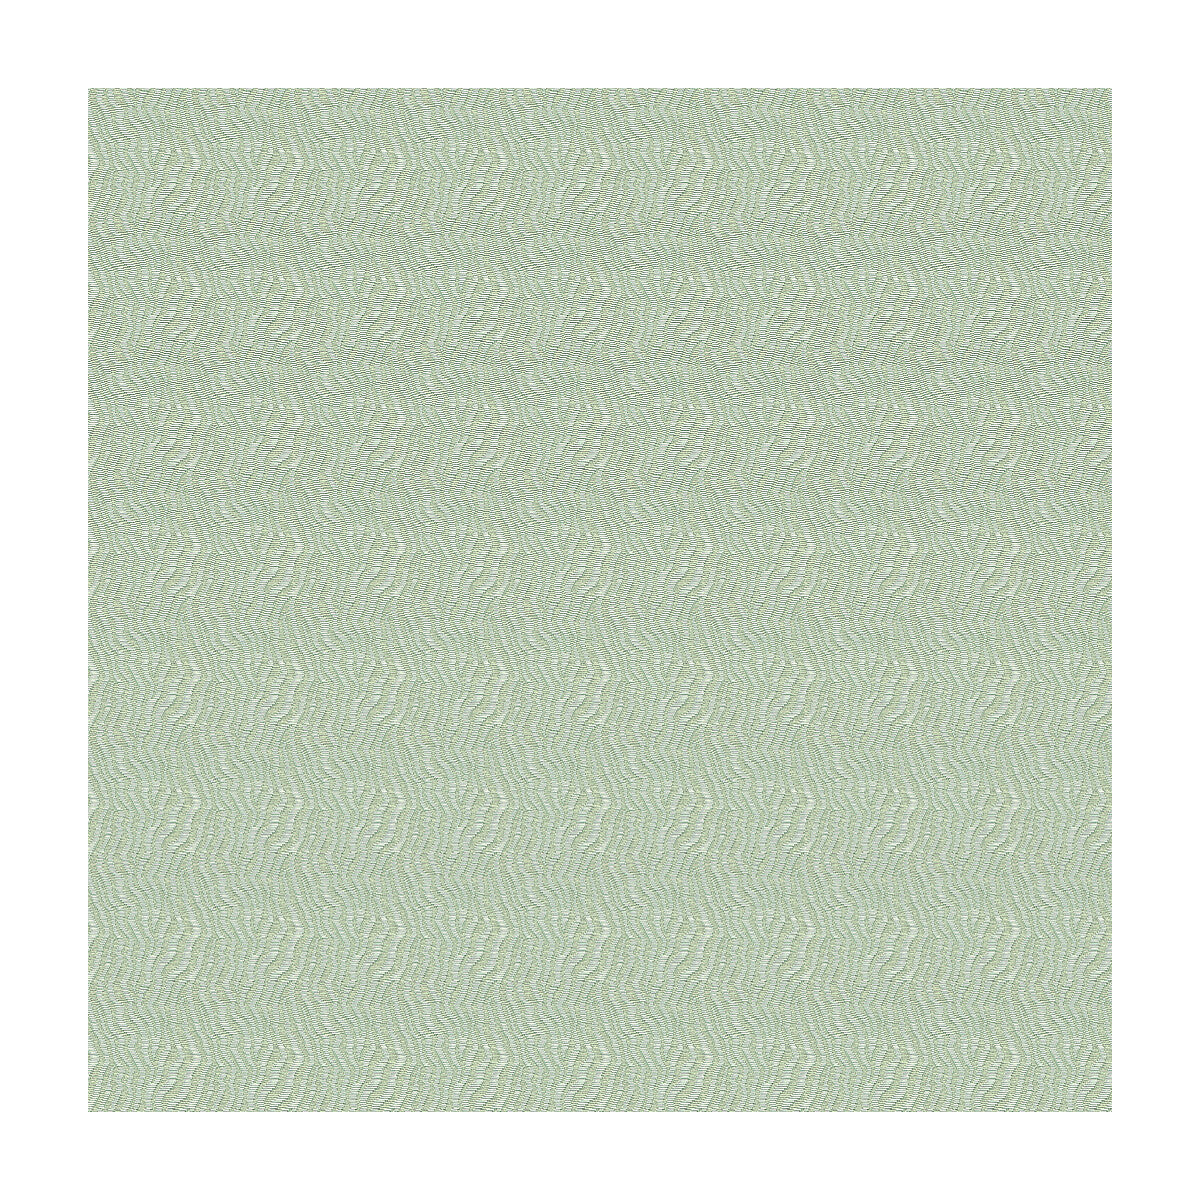 Kf Smt Jentry fabric in mist color - pattern 27968.1115.0 - by Kravet Smart in the Candice Olson collection